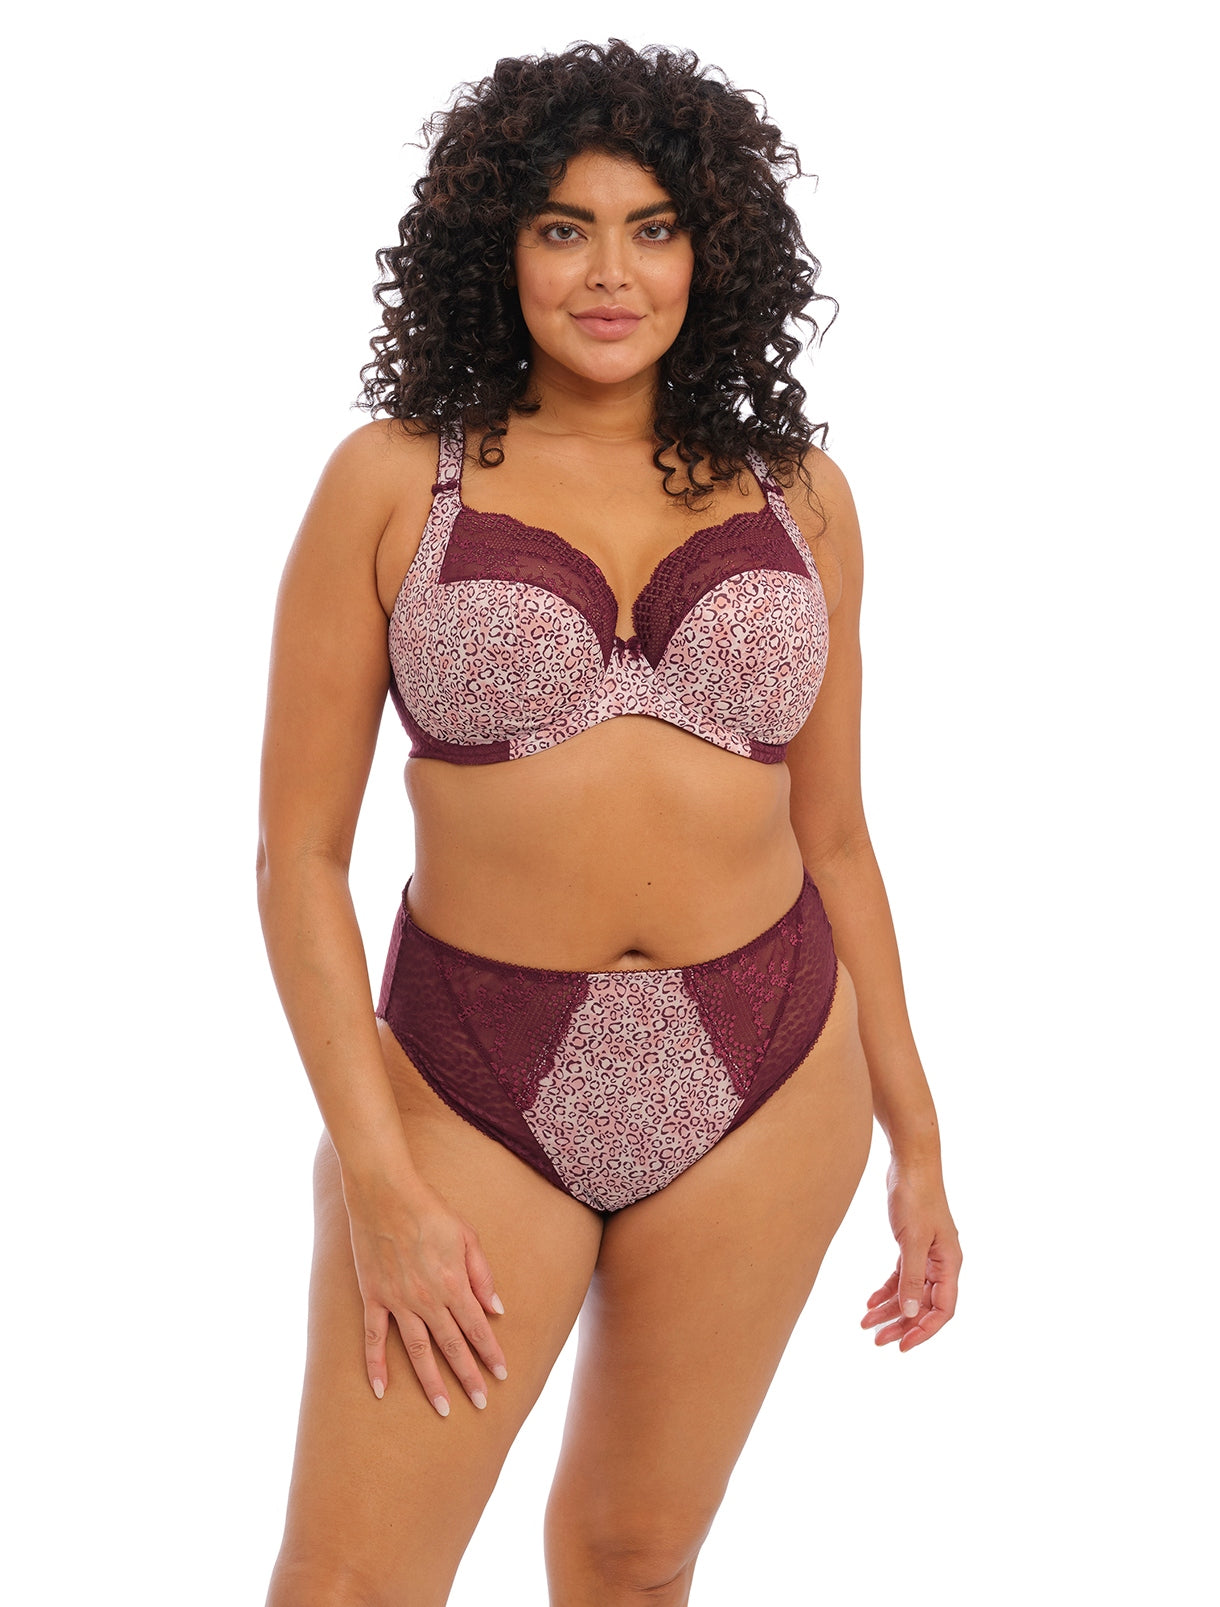 Lucie EL4490 marron and cheetah print lace sheer underwire plunge stretch bra 